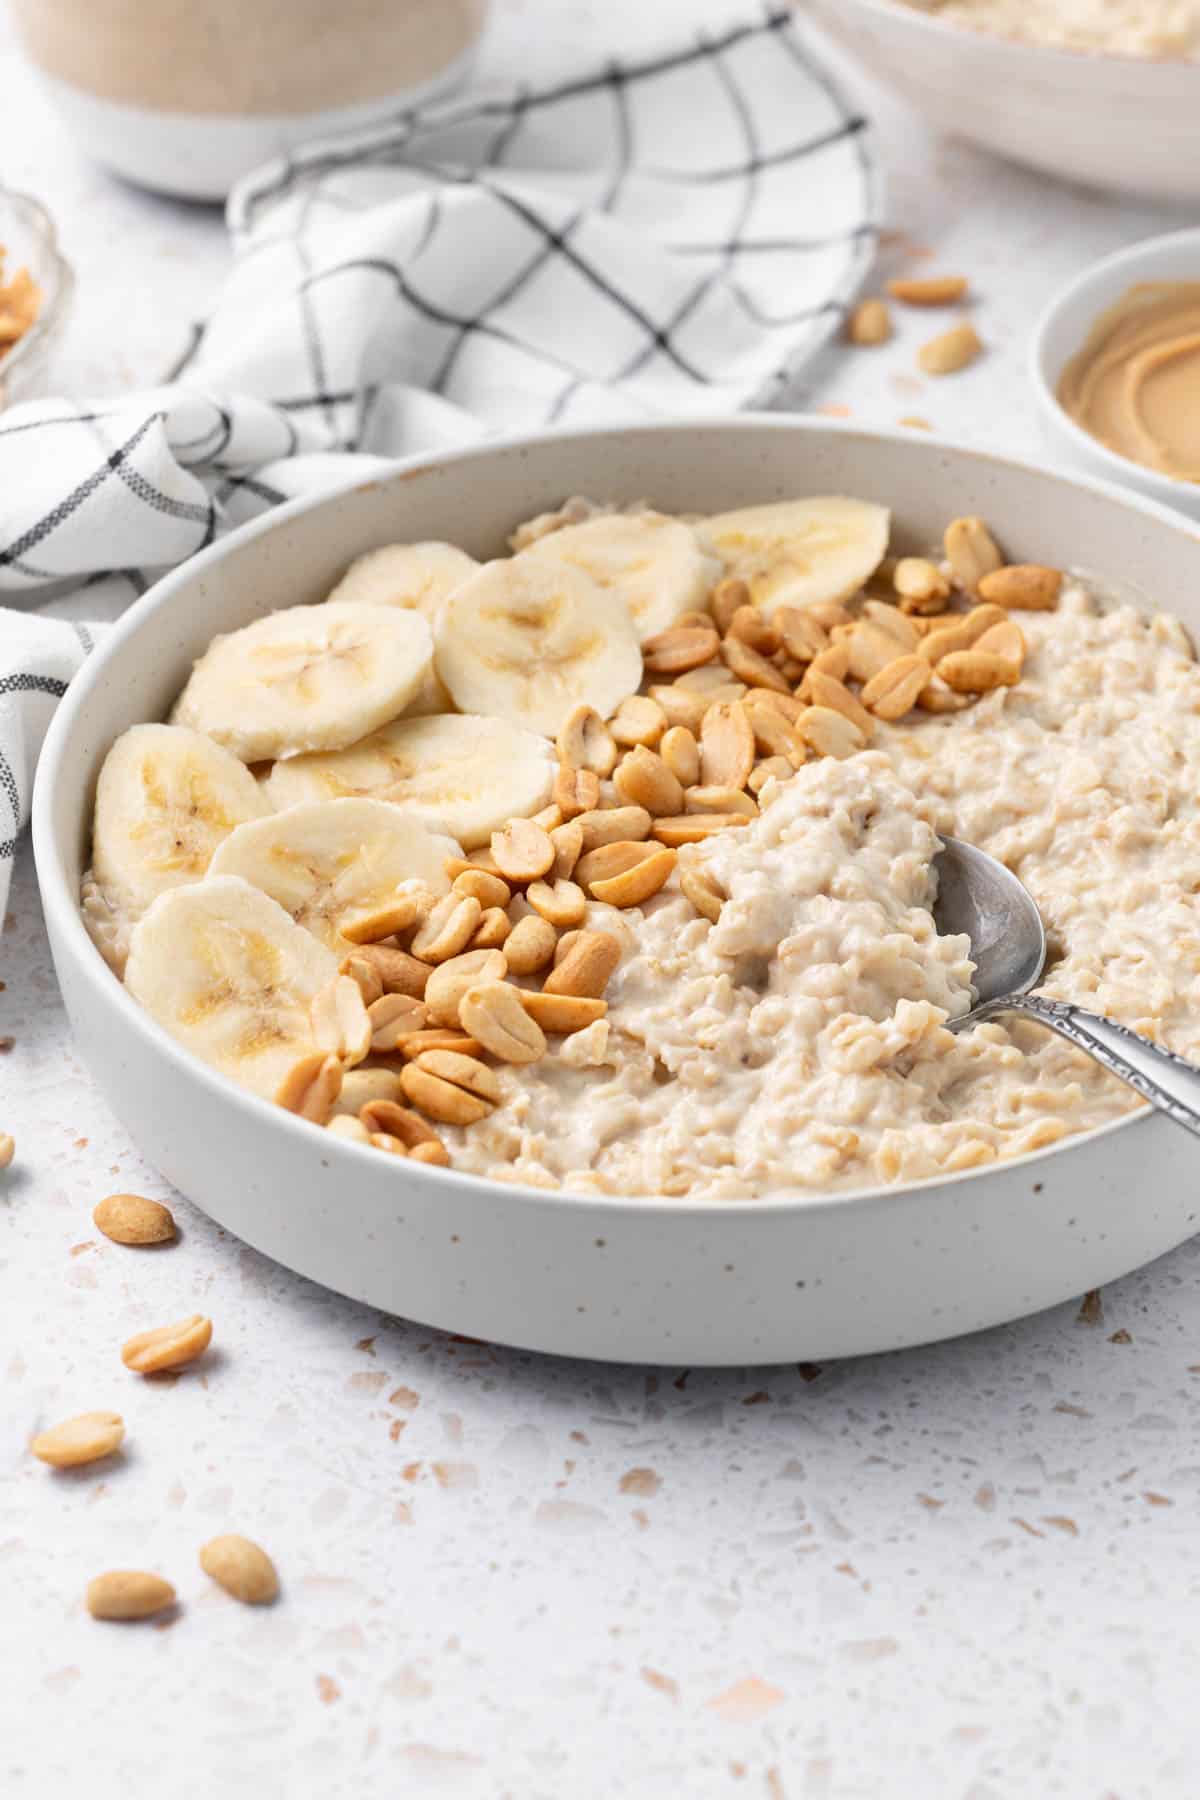 Bowl of Peanut Butter Porridge decorated with some banana slices and peanuts, with a spoon scooping some porridge.